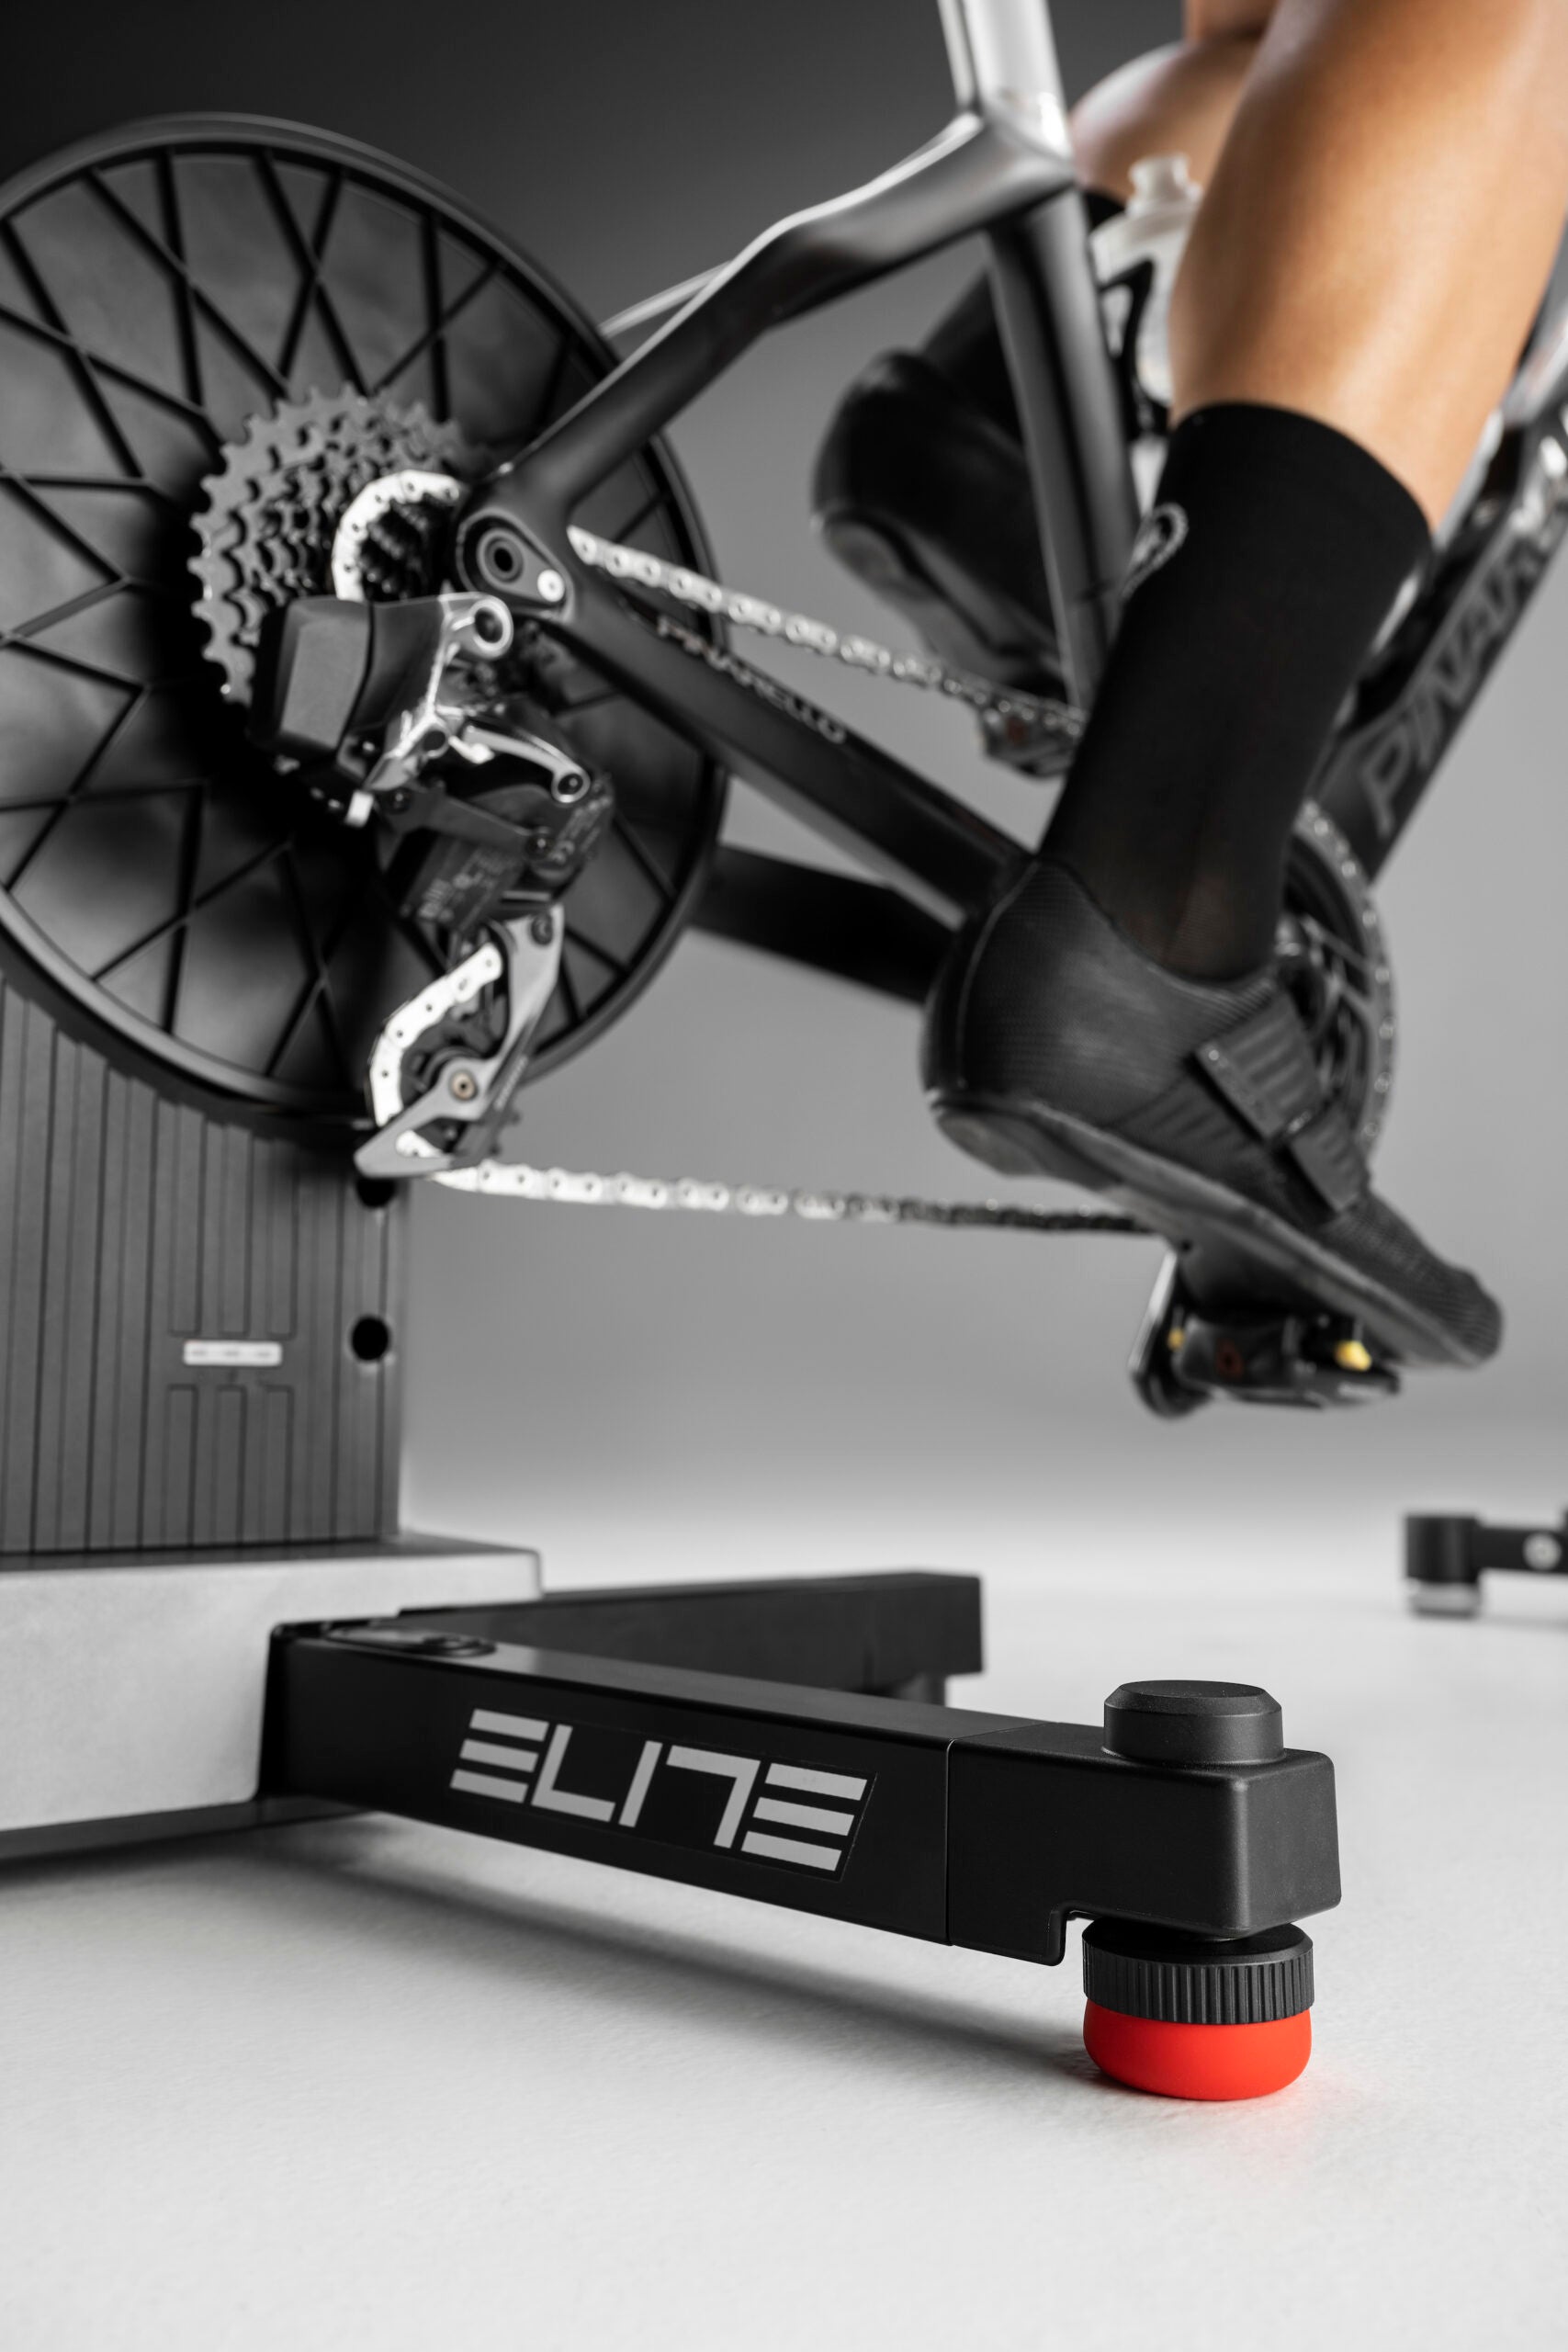 In our review, the Elite Justo smart trainer had flex feet for rocking motion